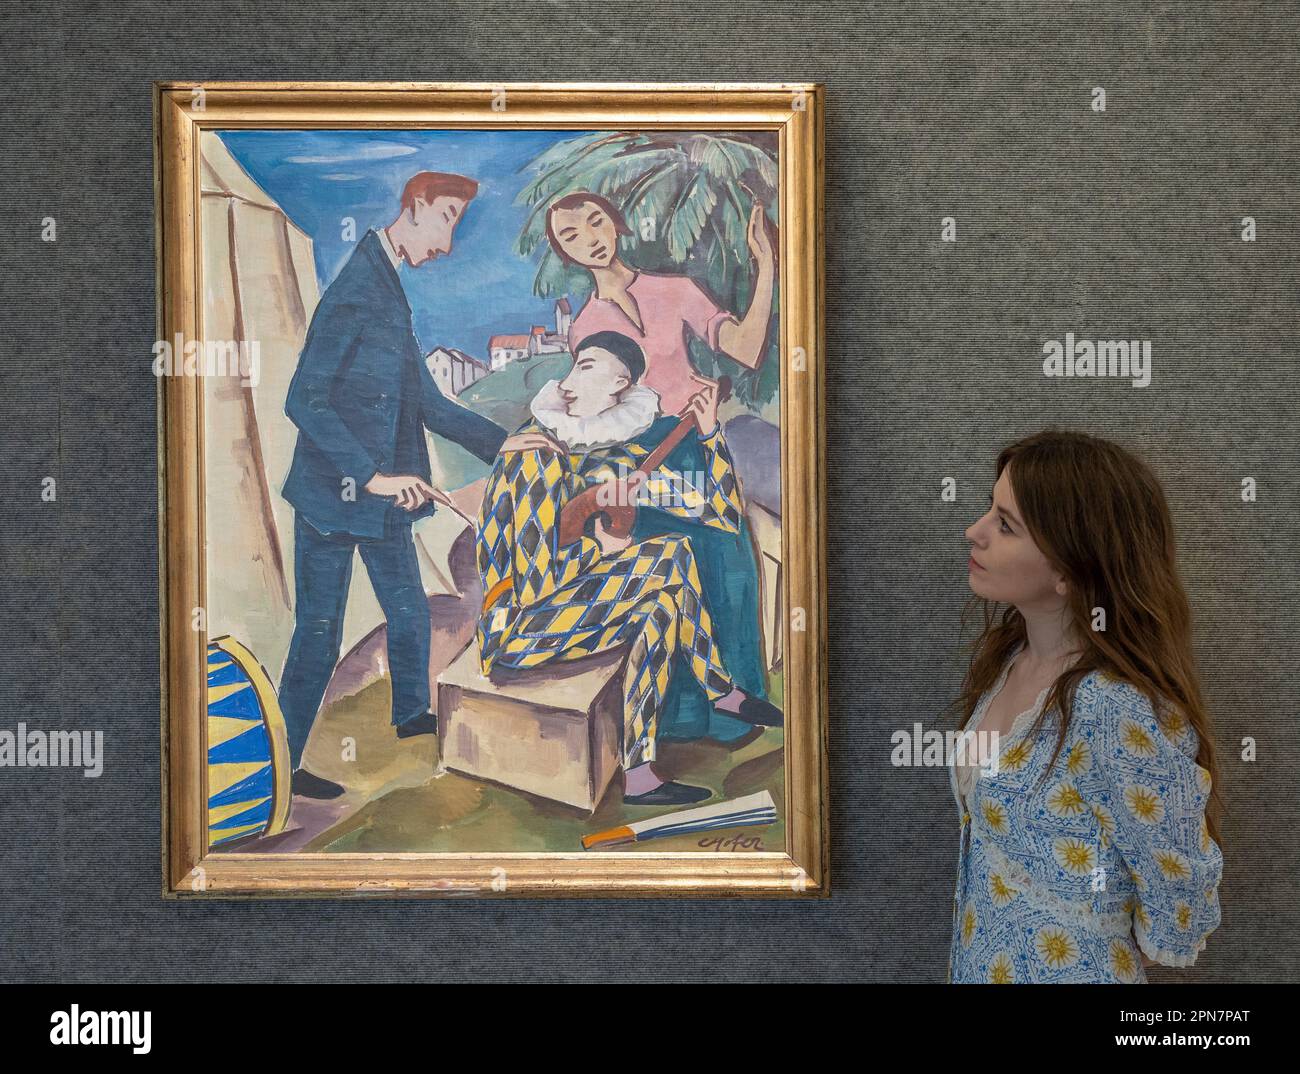 Bonhams, London, UK. 17th Apr, 2023. Impressionist and Modern Art sale takes place on 20 April. Highlights include: Karl Hofer (1878-1955), Circusleute, estimate £70,000 - £100,000. Credit: Malcolm Park/Alamy Live News Stock Photo